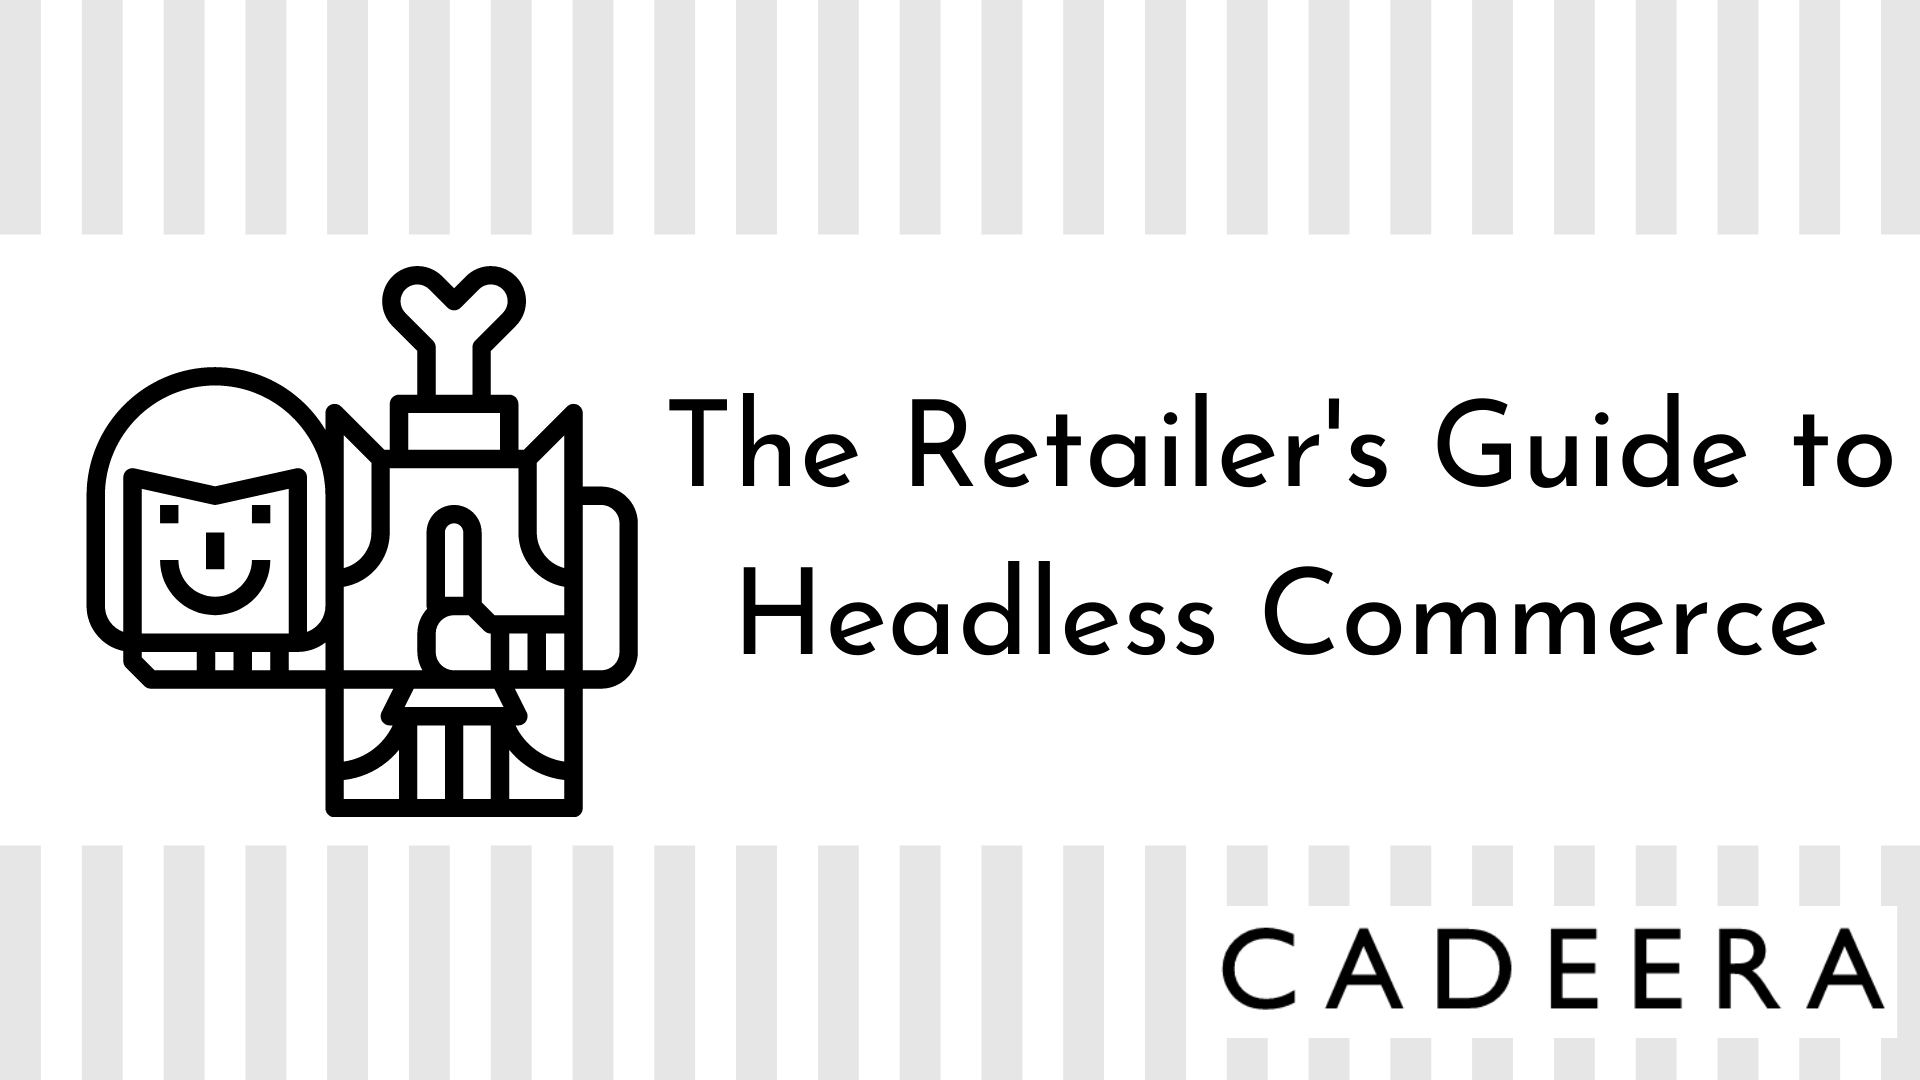 The Retailer's Guide to Headless Commerce